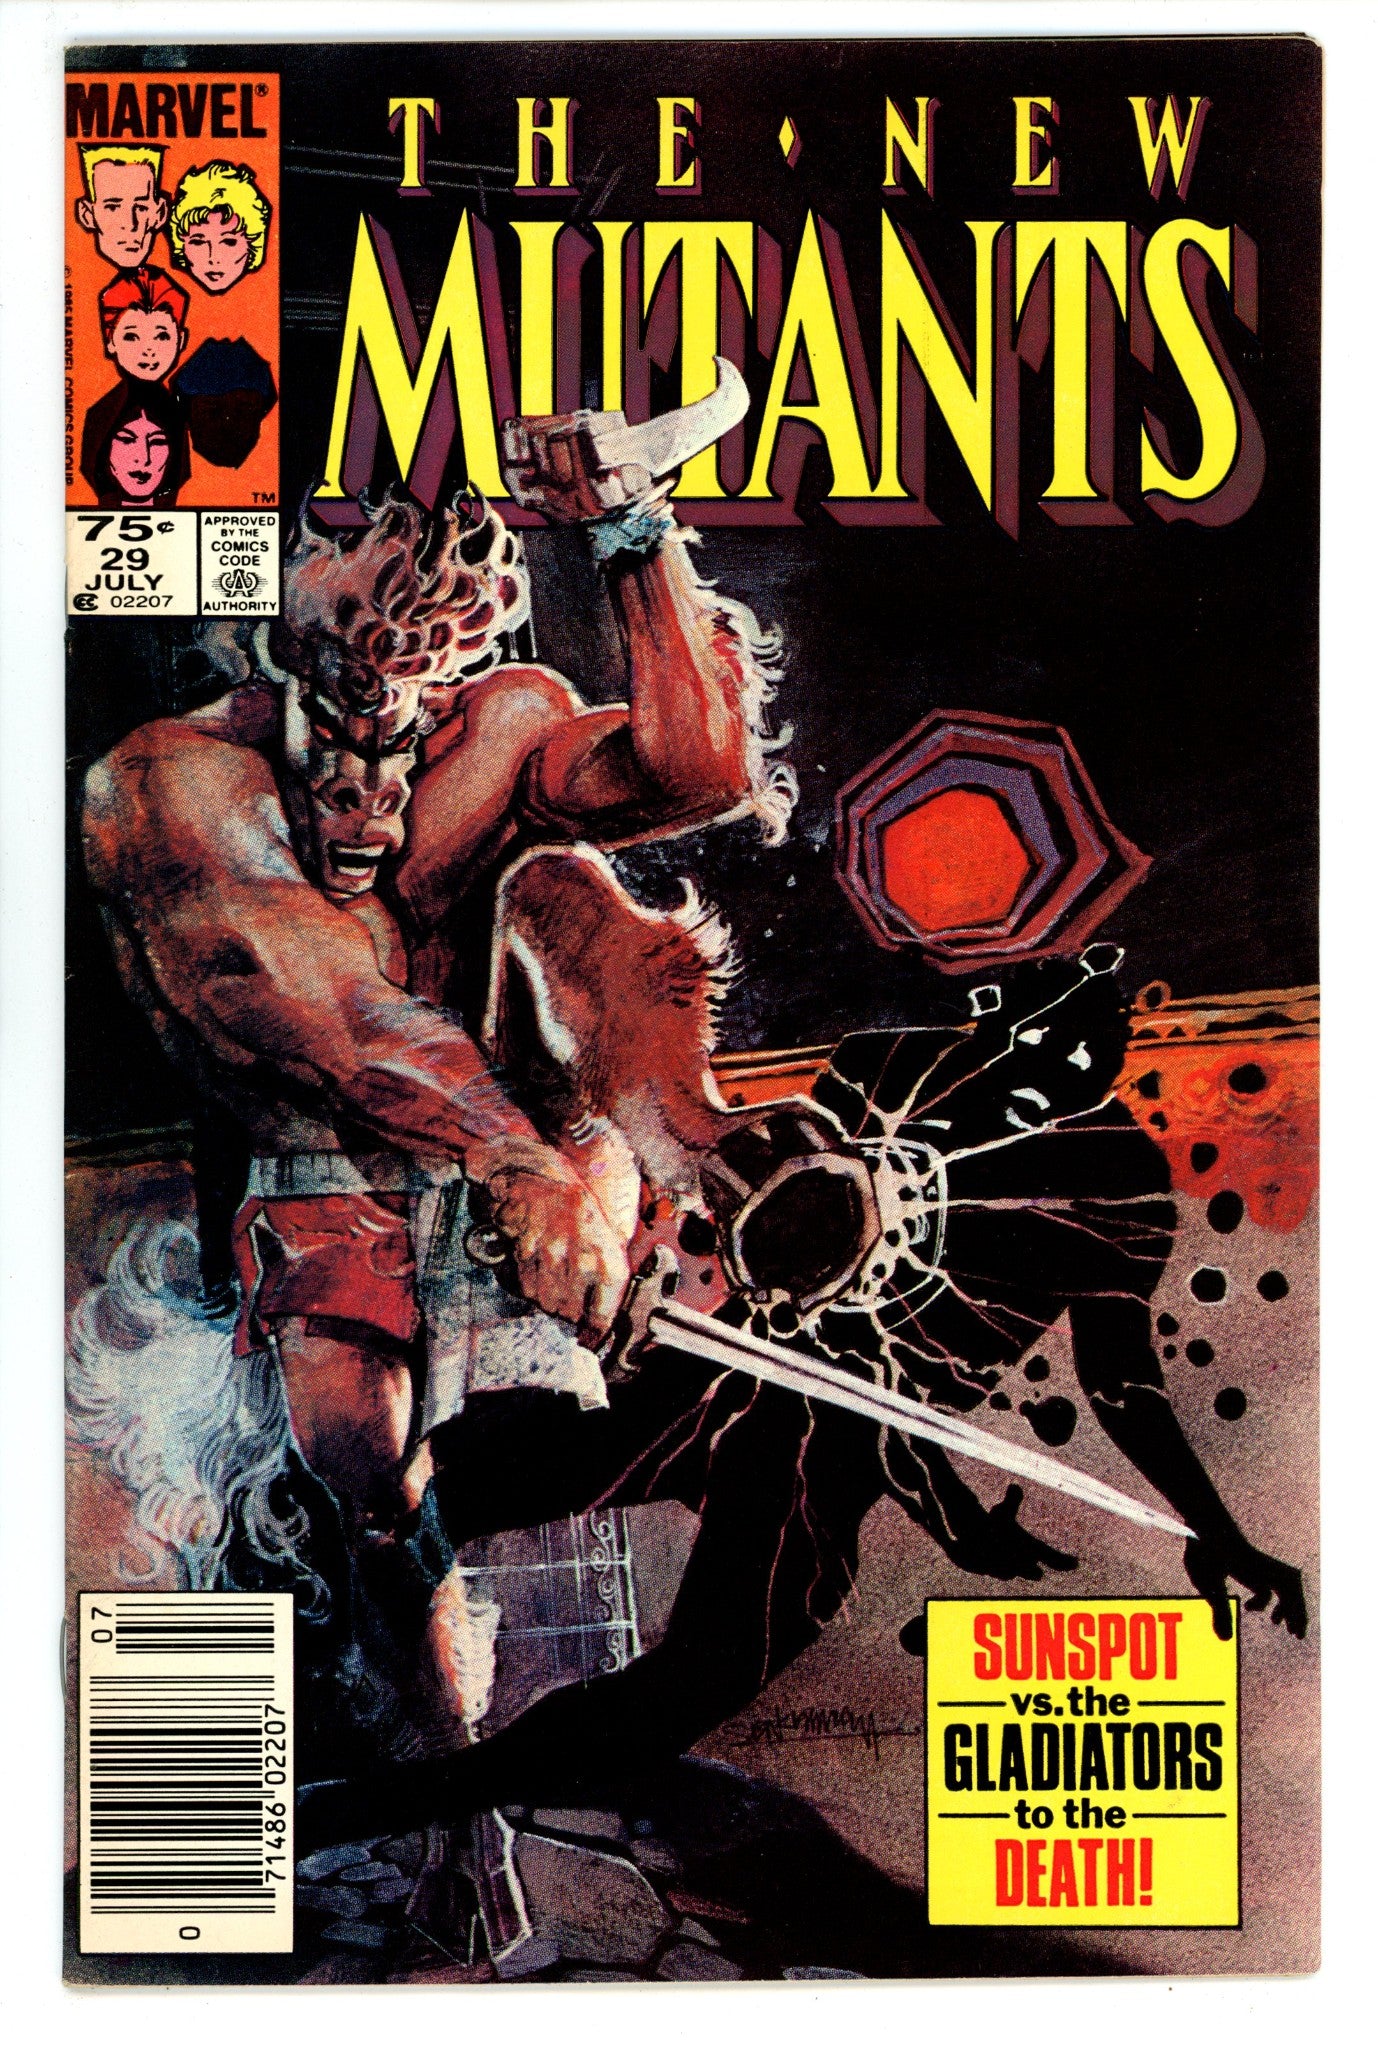 The New Mutants Vol 1 29 VF- (7.5) (1985) Canadian Price Variant 